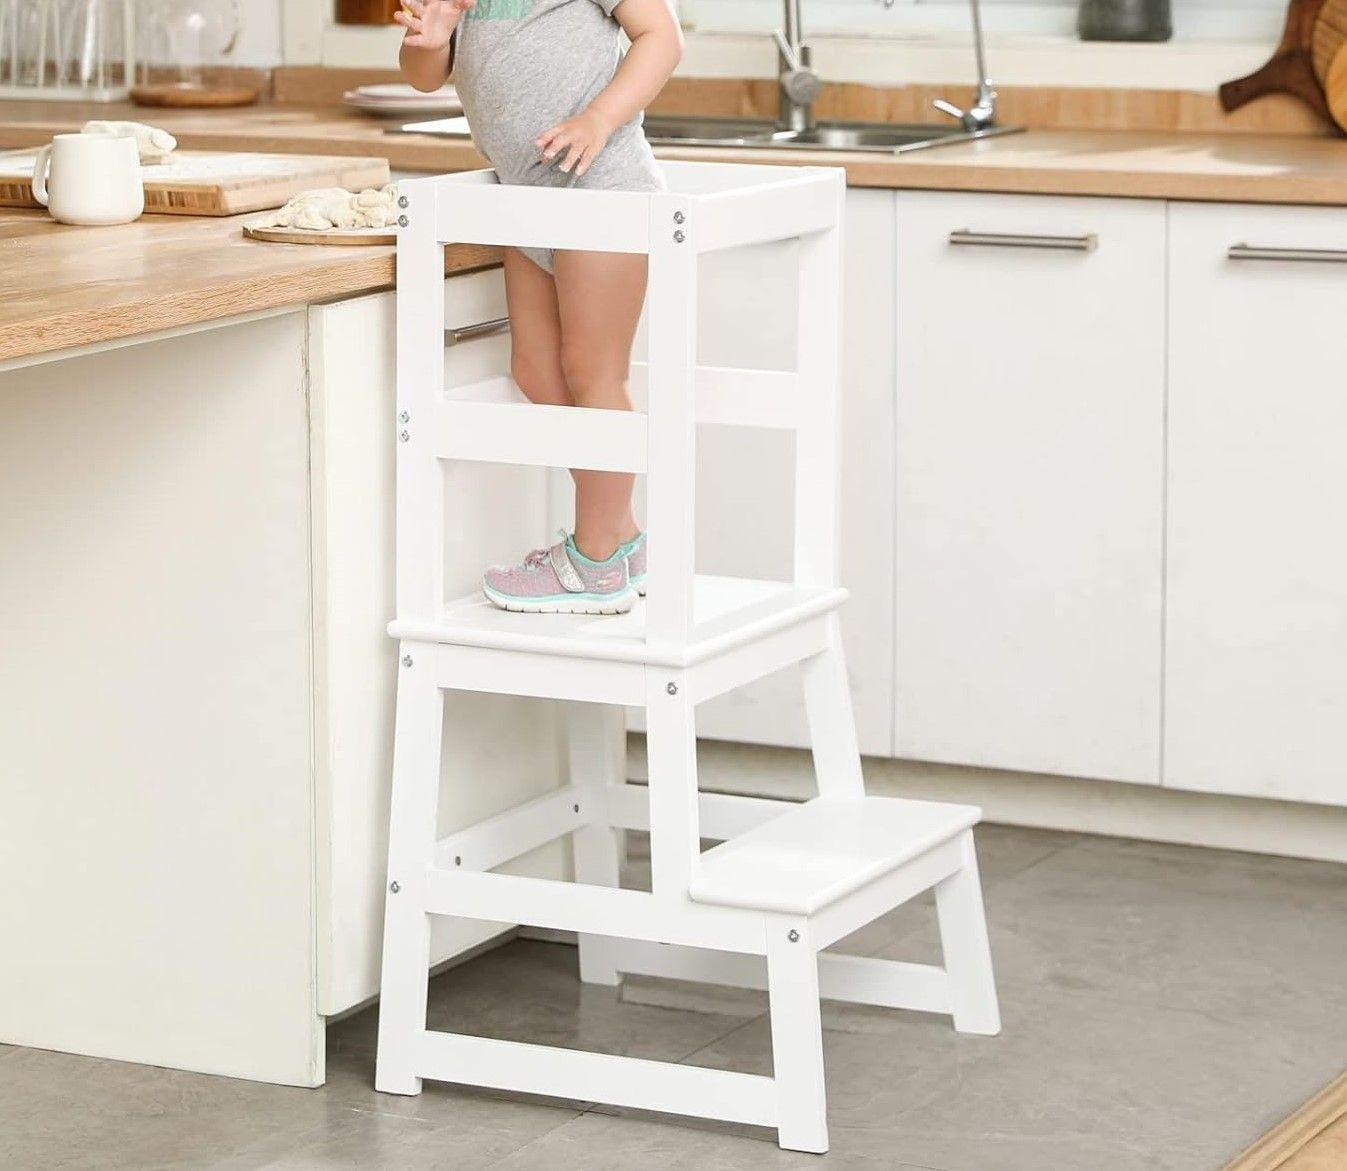 Kids Kitchen Step Stool with Safety Rail, Wood Construction, Montessori Learning Tower - White